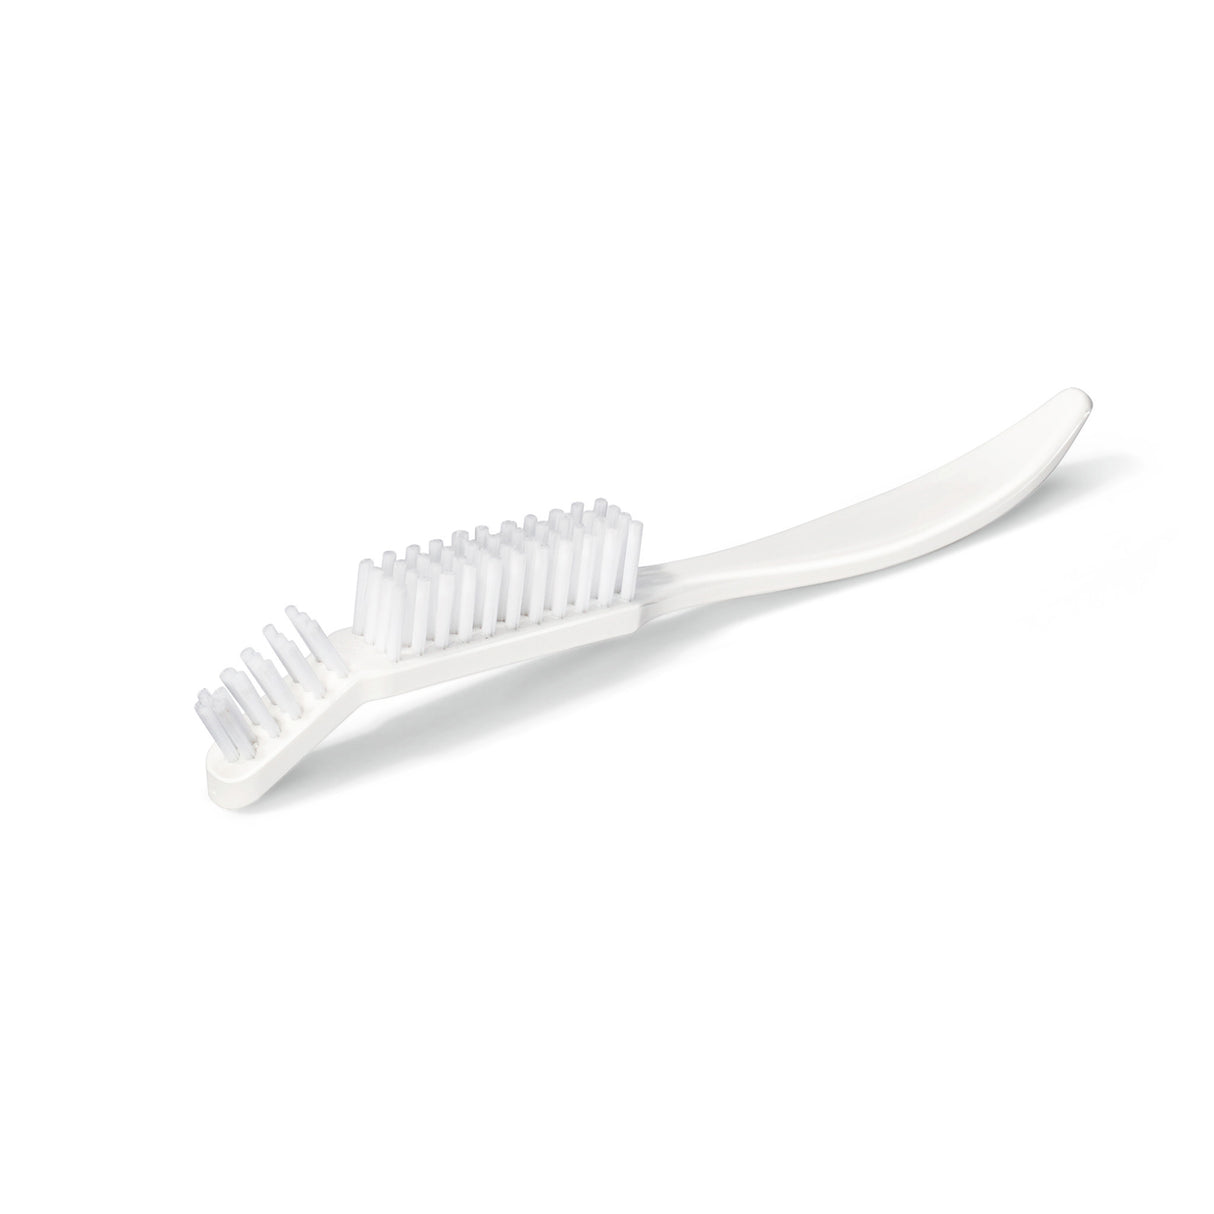 Brush for cleaning tools (sterilizable)